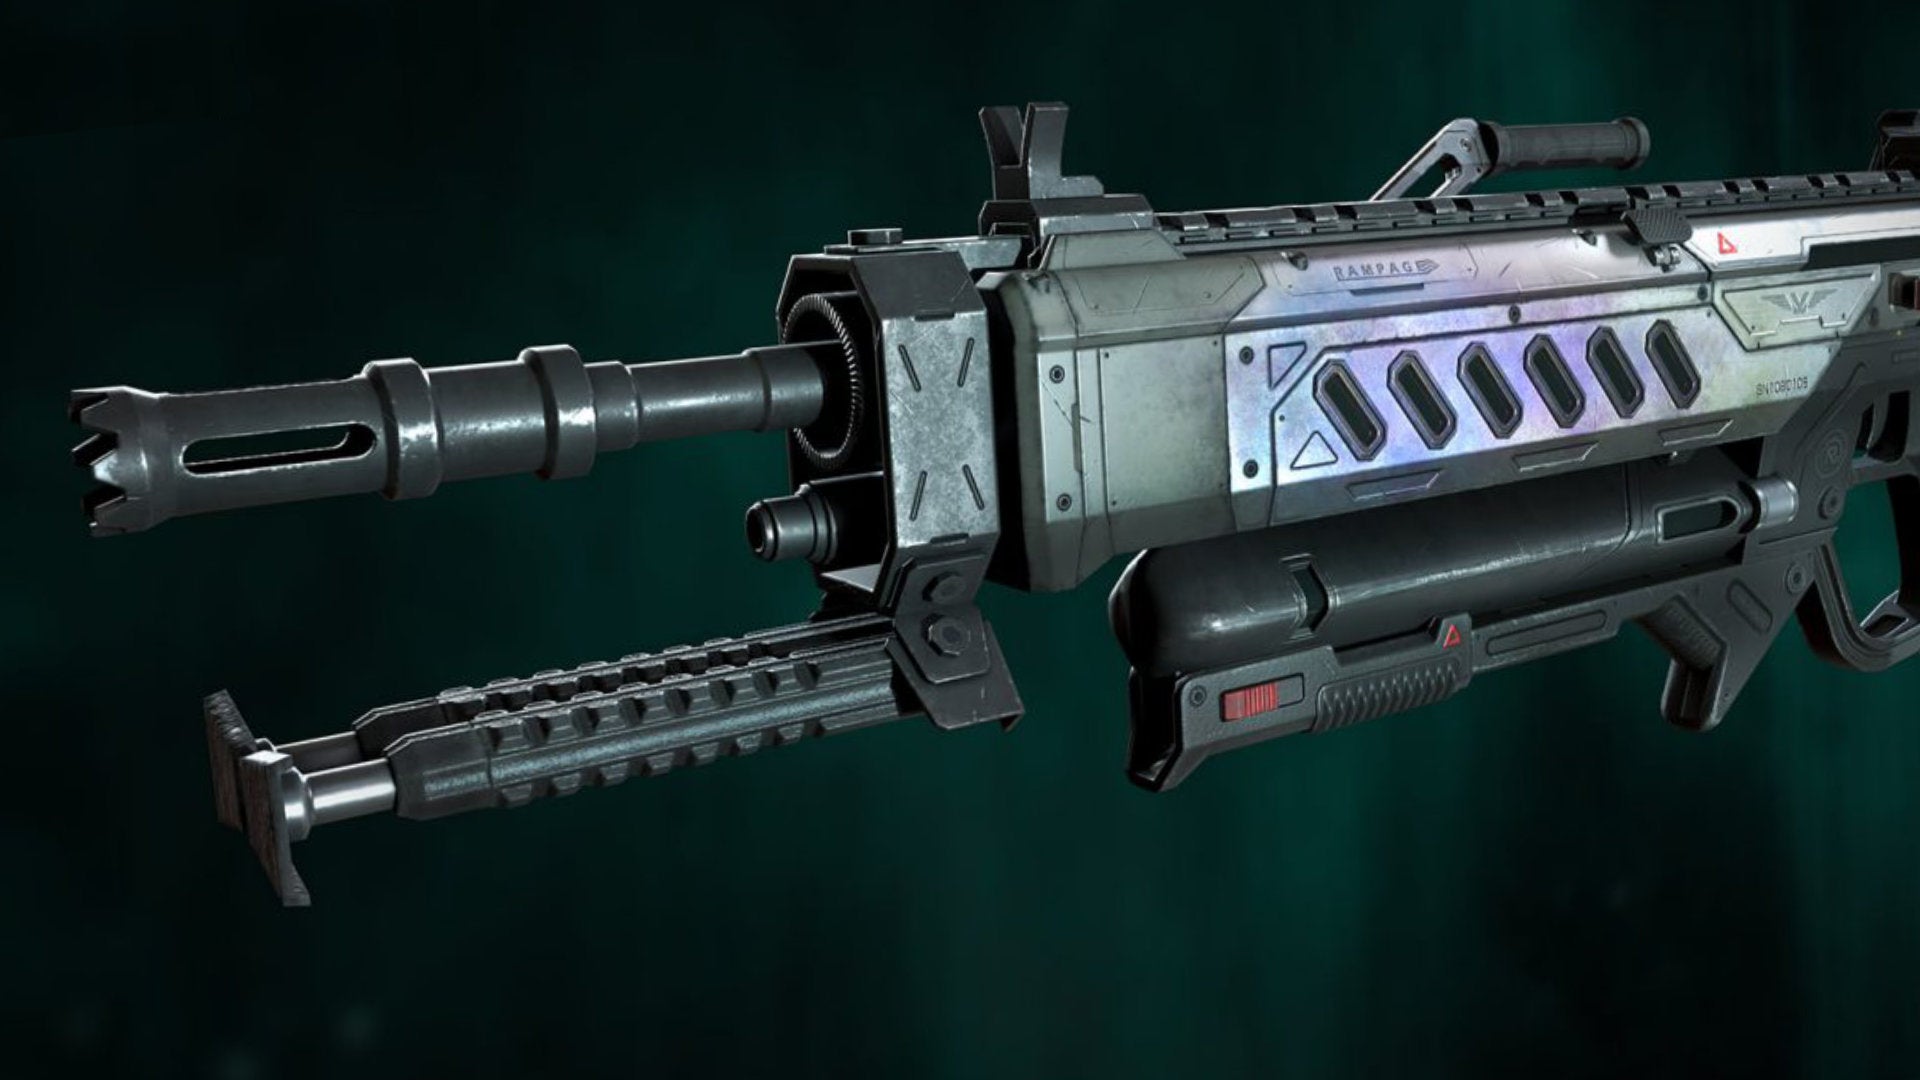 Promotional art of the Rampage, an LMG added in Season 10 of Apex Legends.